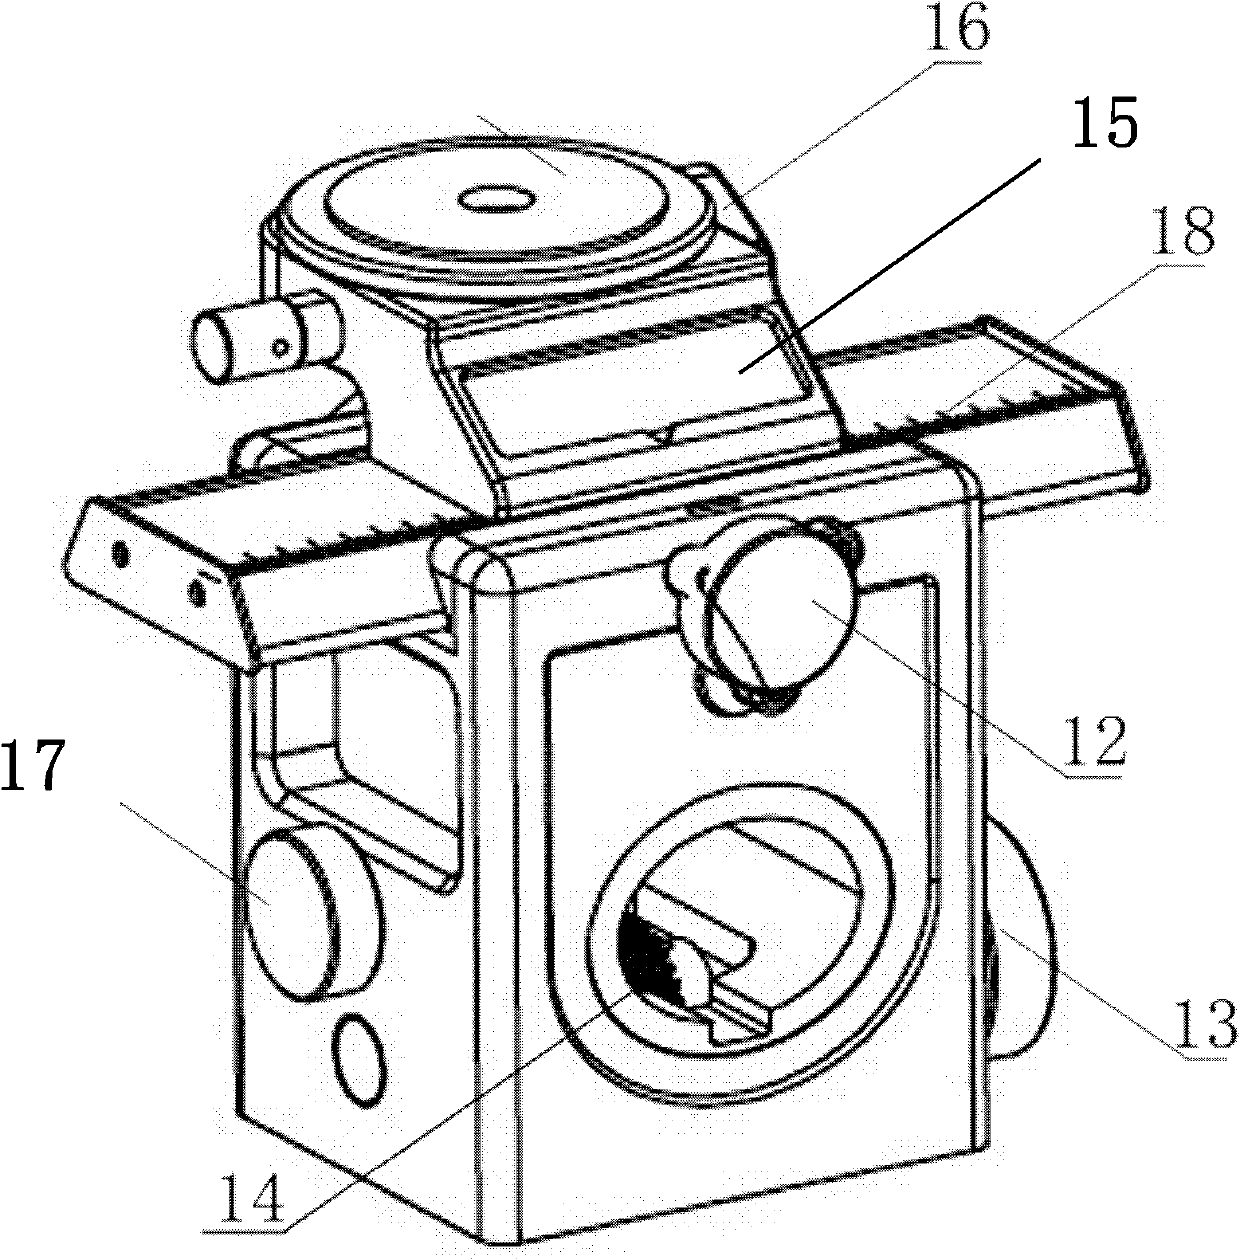 Video camera combined photographic frame structure